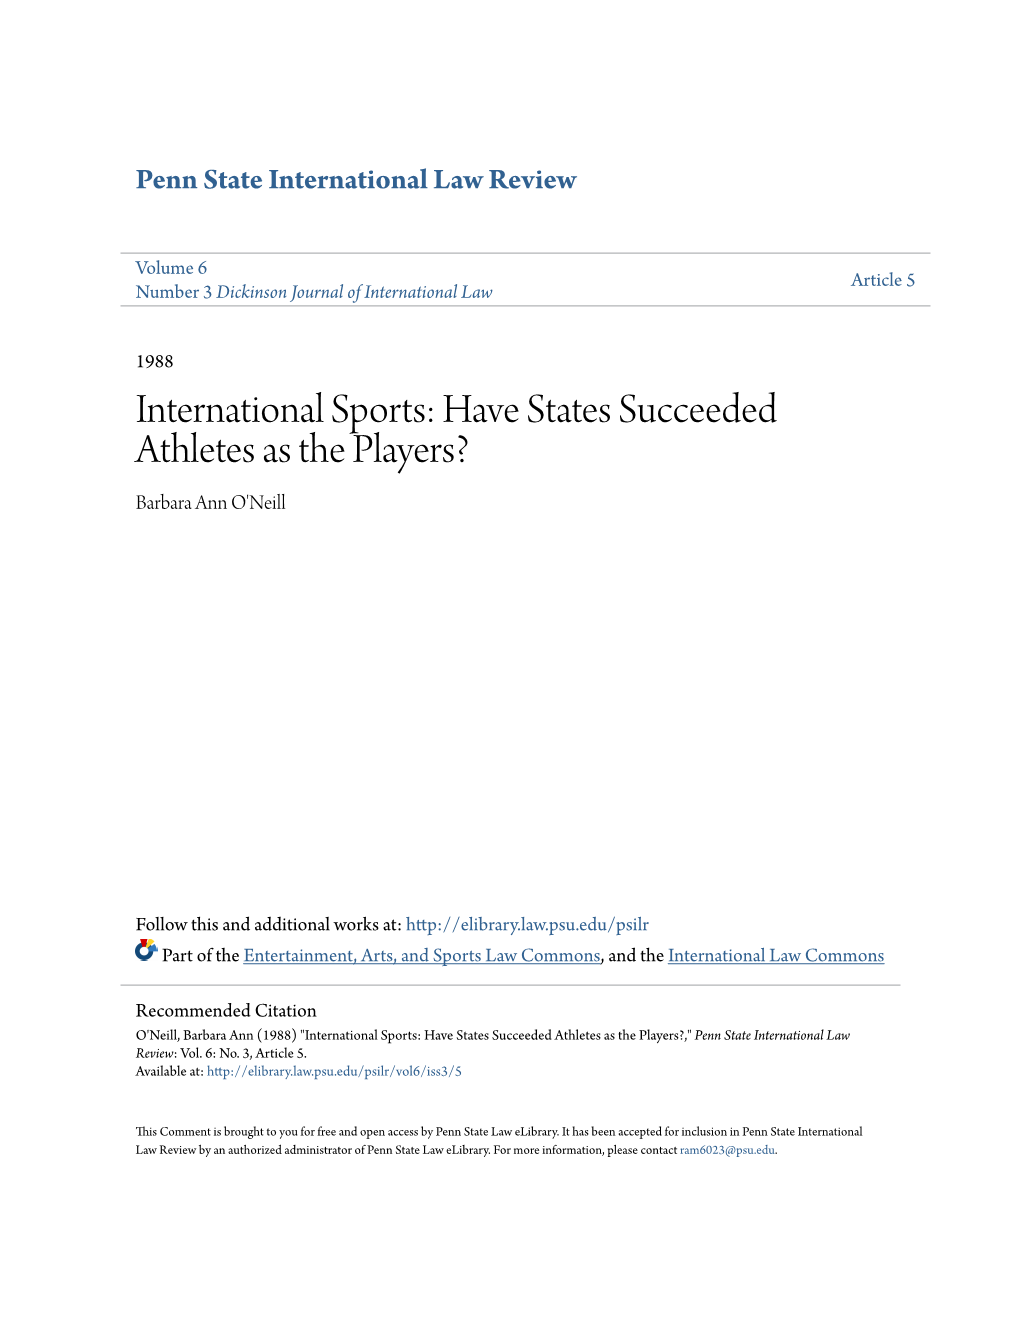 International Sports: Have States Succeeded Athletes As the Players? Barbara Ann O'neill